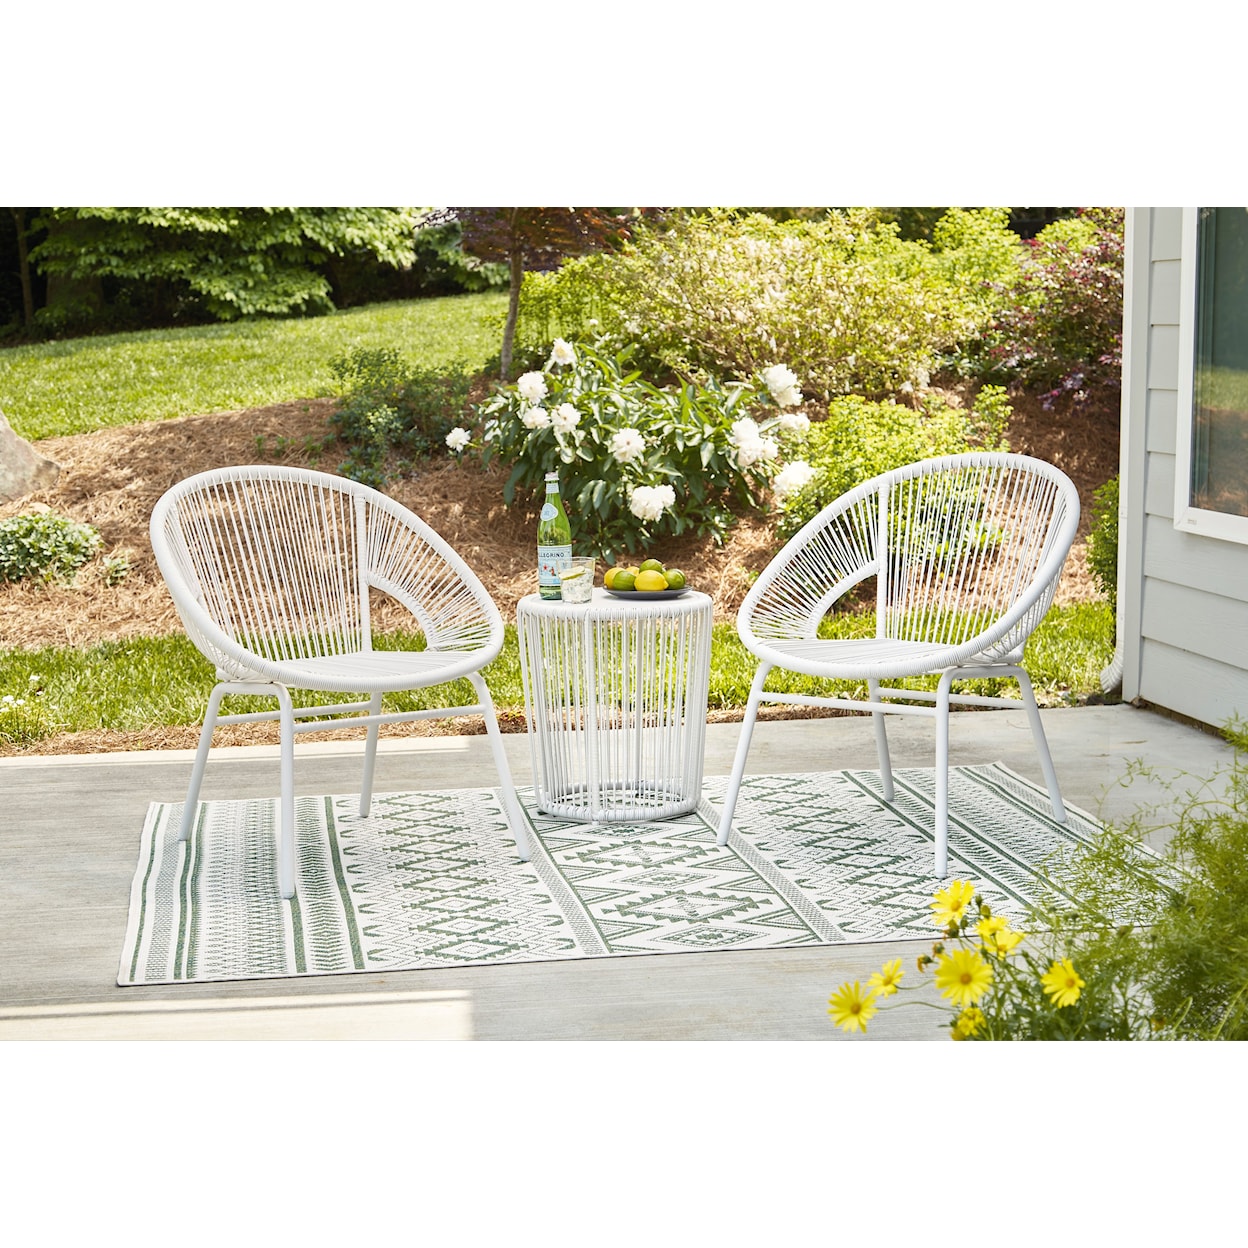 Signature Mandarin Cape Outdoor Table and Chairs (Set of 3)